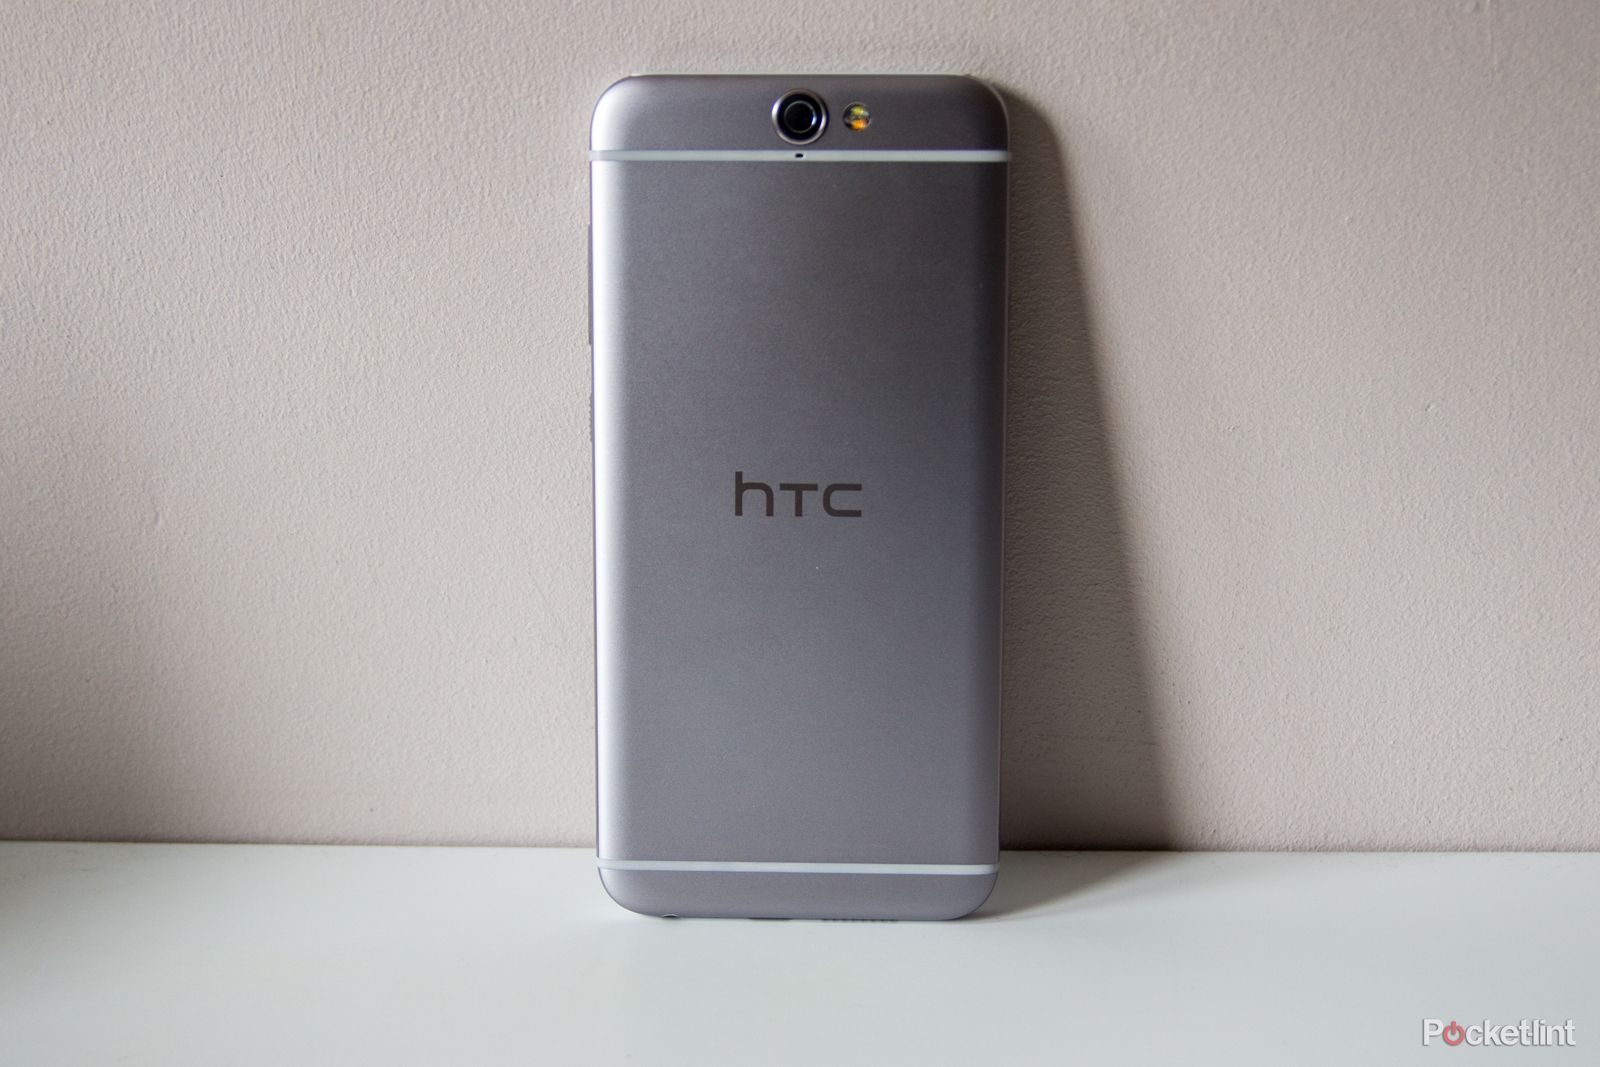 huge leak spills htc one m10 specs quad hd display and 12mp ultrapixel camera rumoured image 1